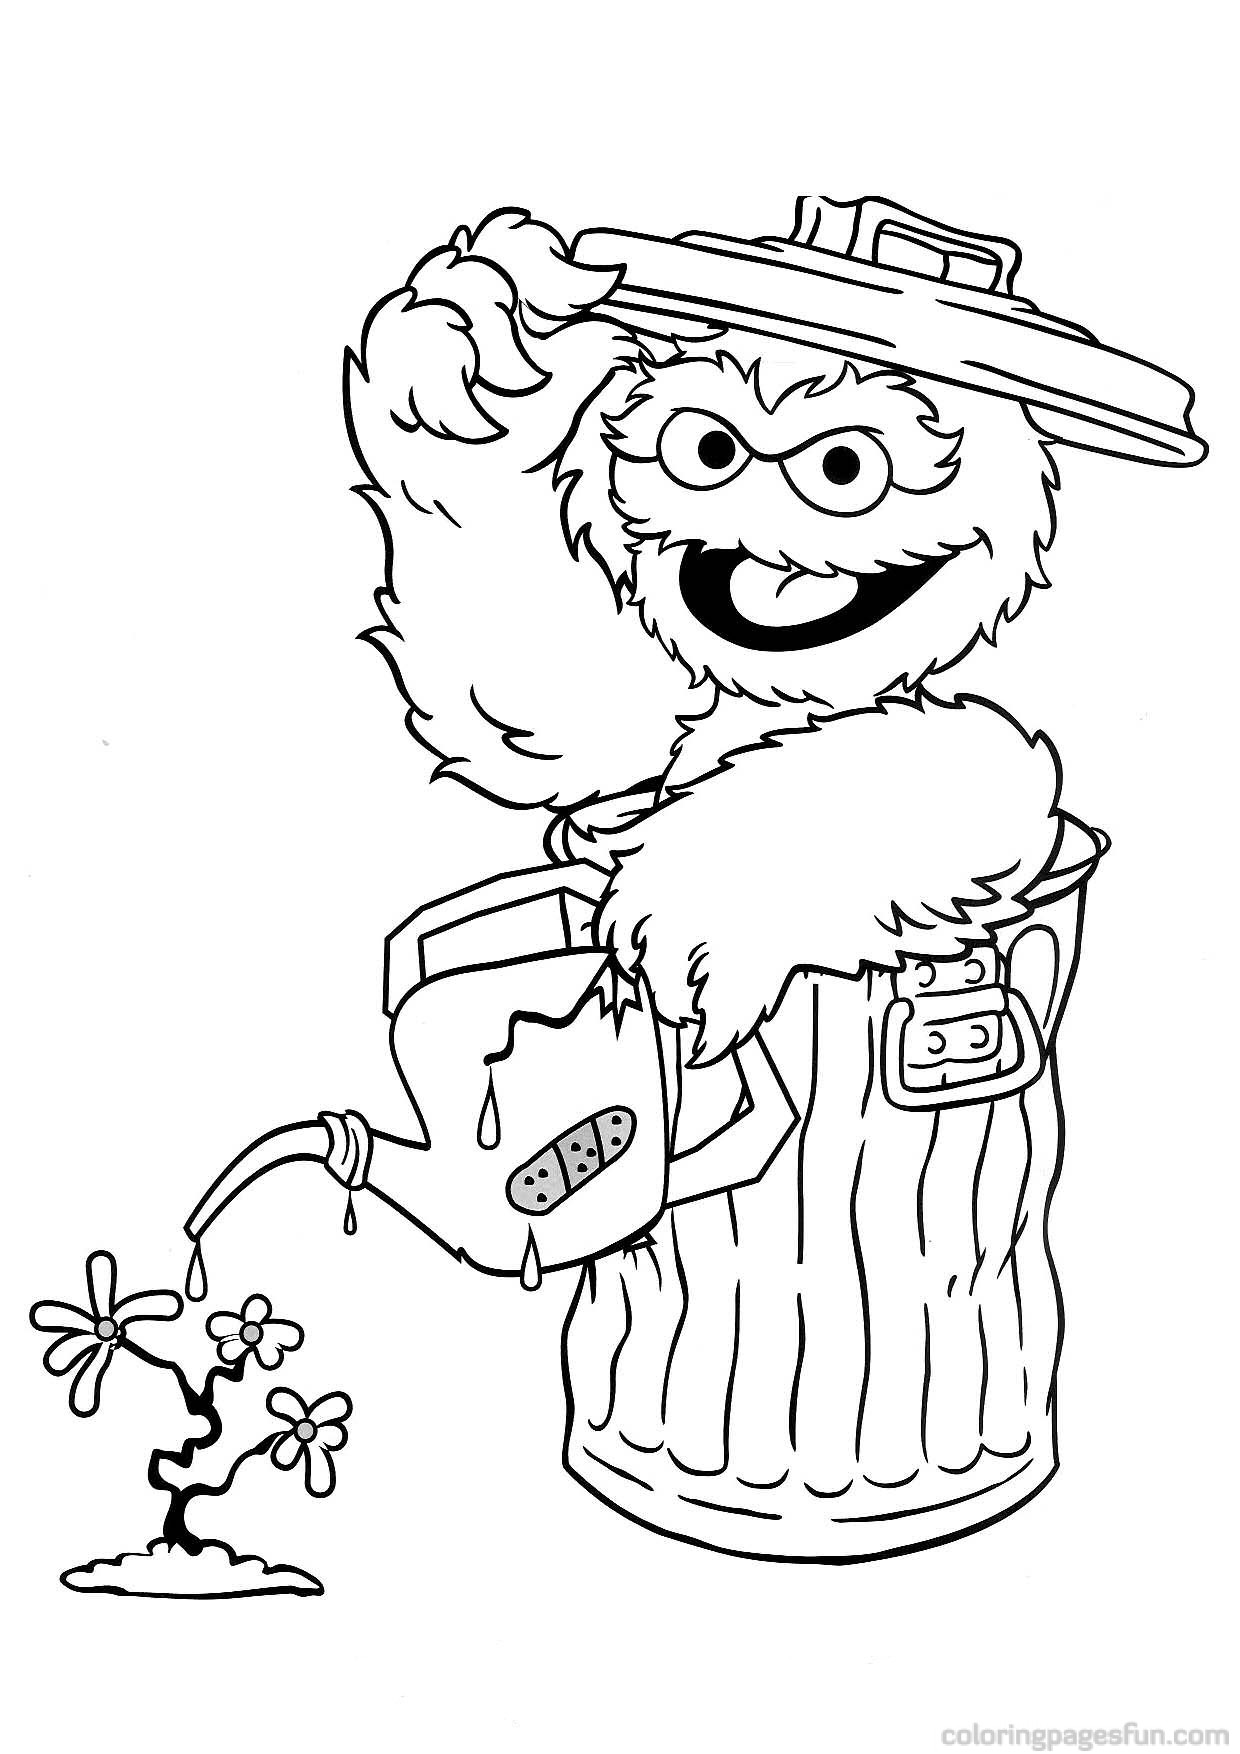 Big Bird Coloring Page In Bird Coloring Pages Sesame Street My Xxx